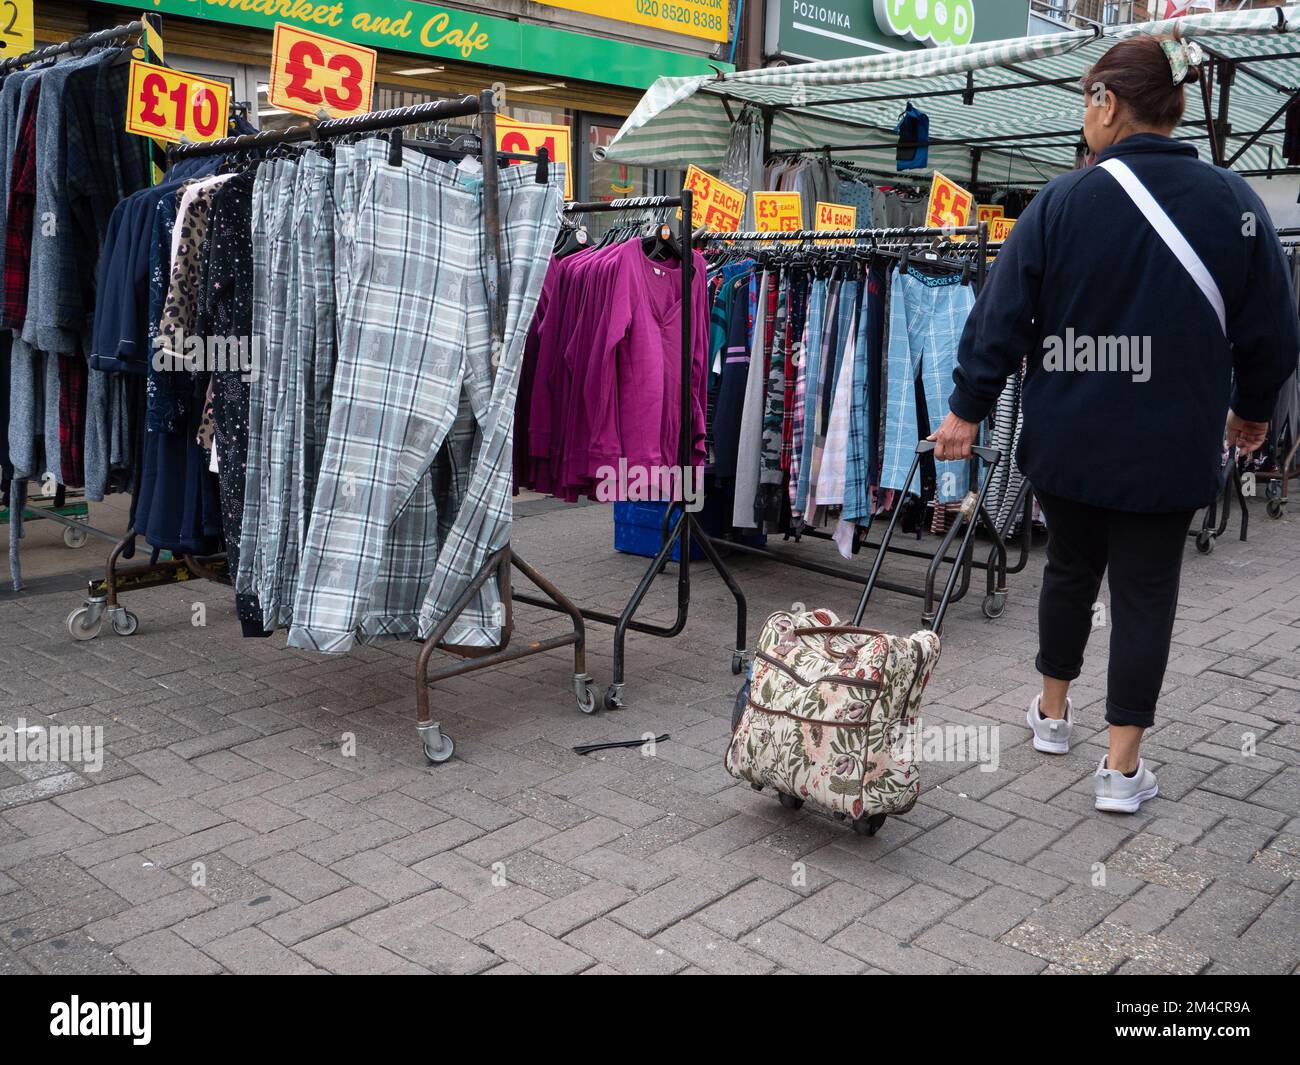 Shoppers looking at prices and goods in Walthamstow market, London, UK, the longest outdoor market in Europe. Traders and market stall holders serve shoppers, with prices displayed in pounds Stock Photo